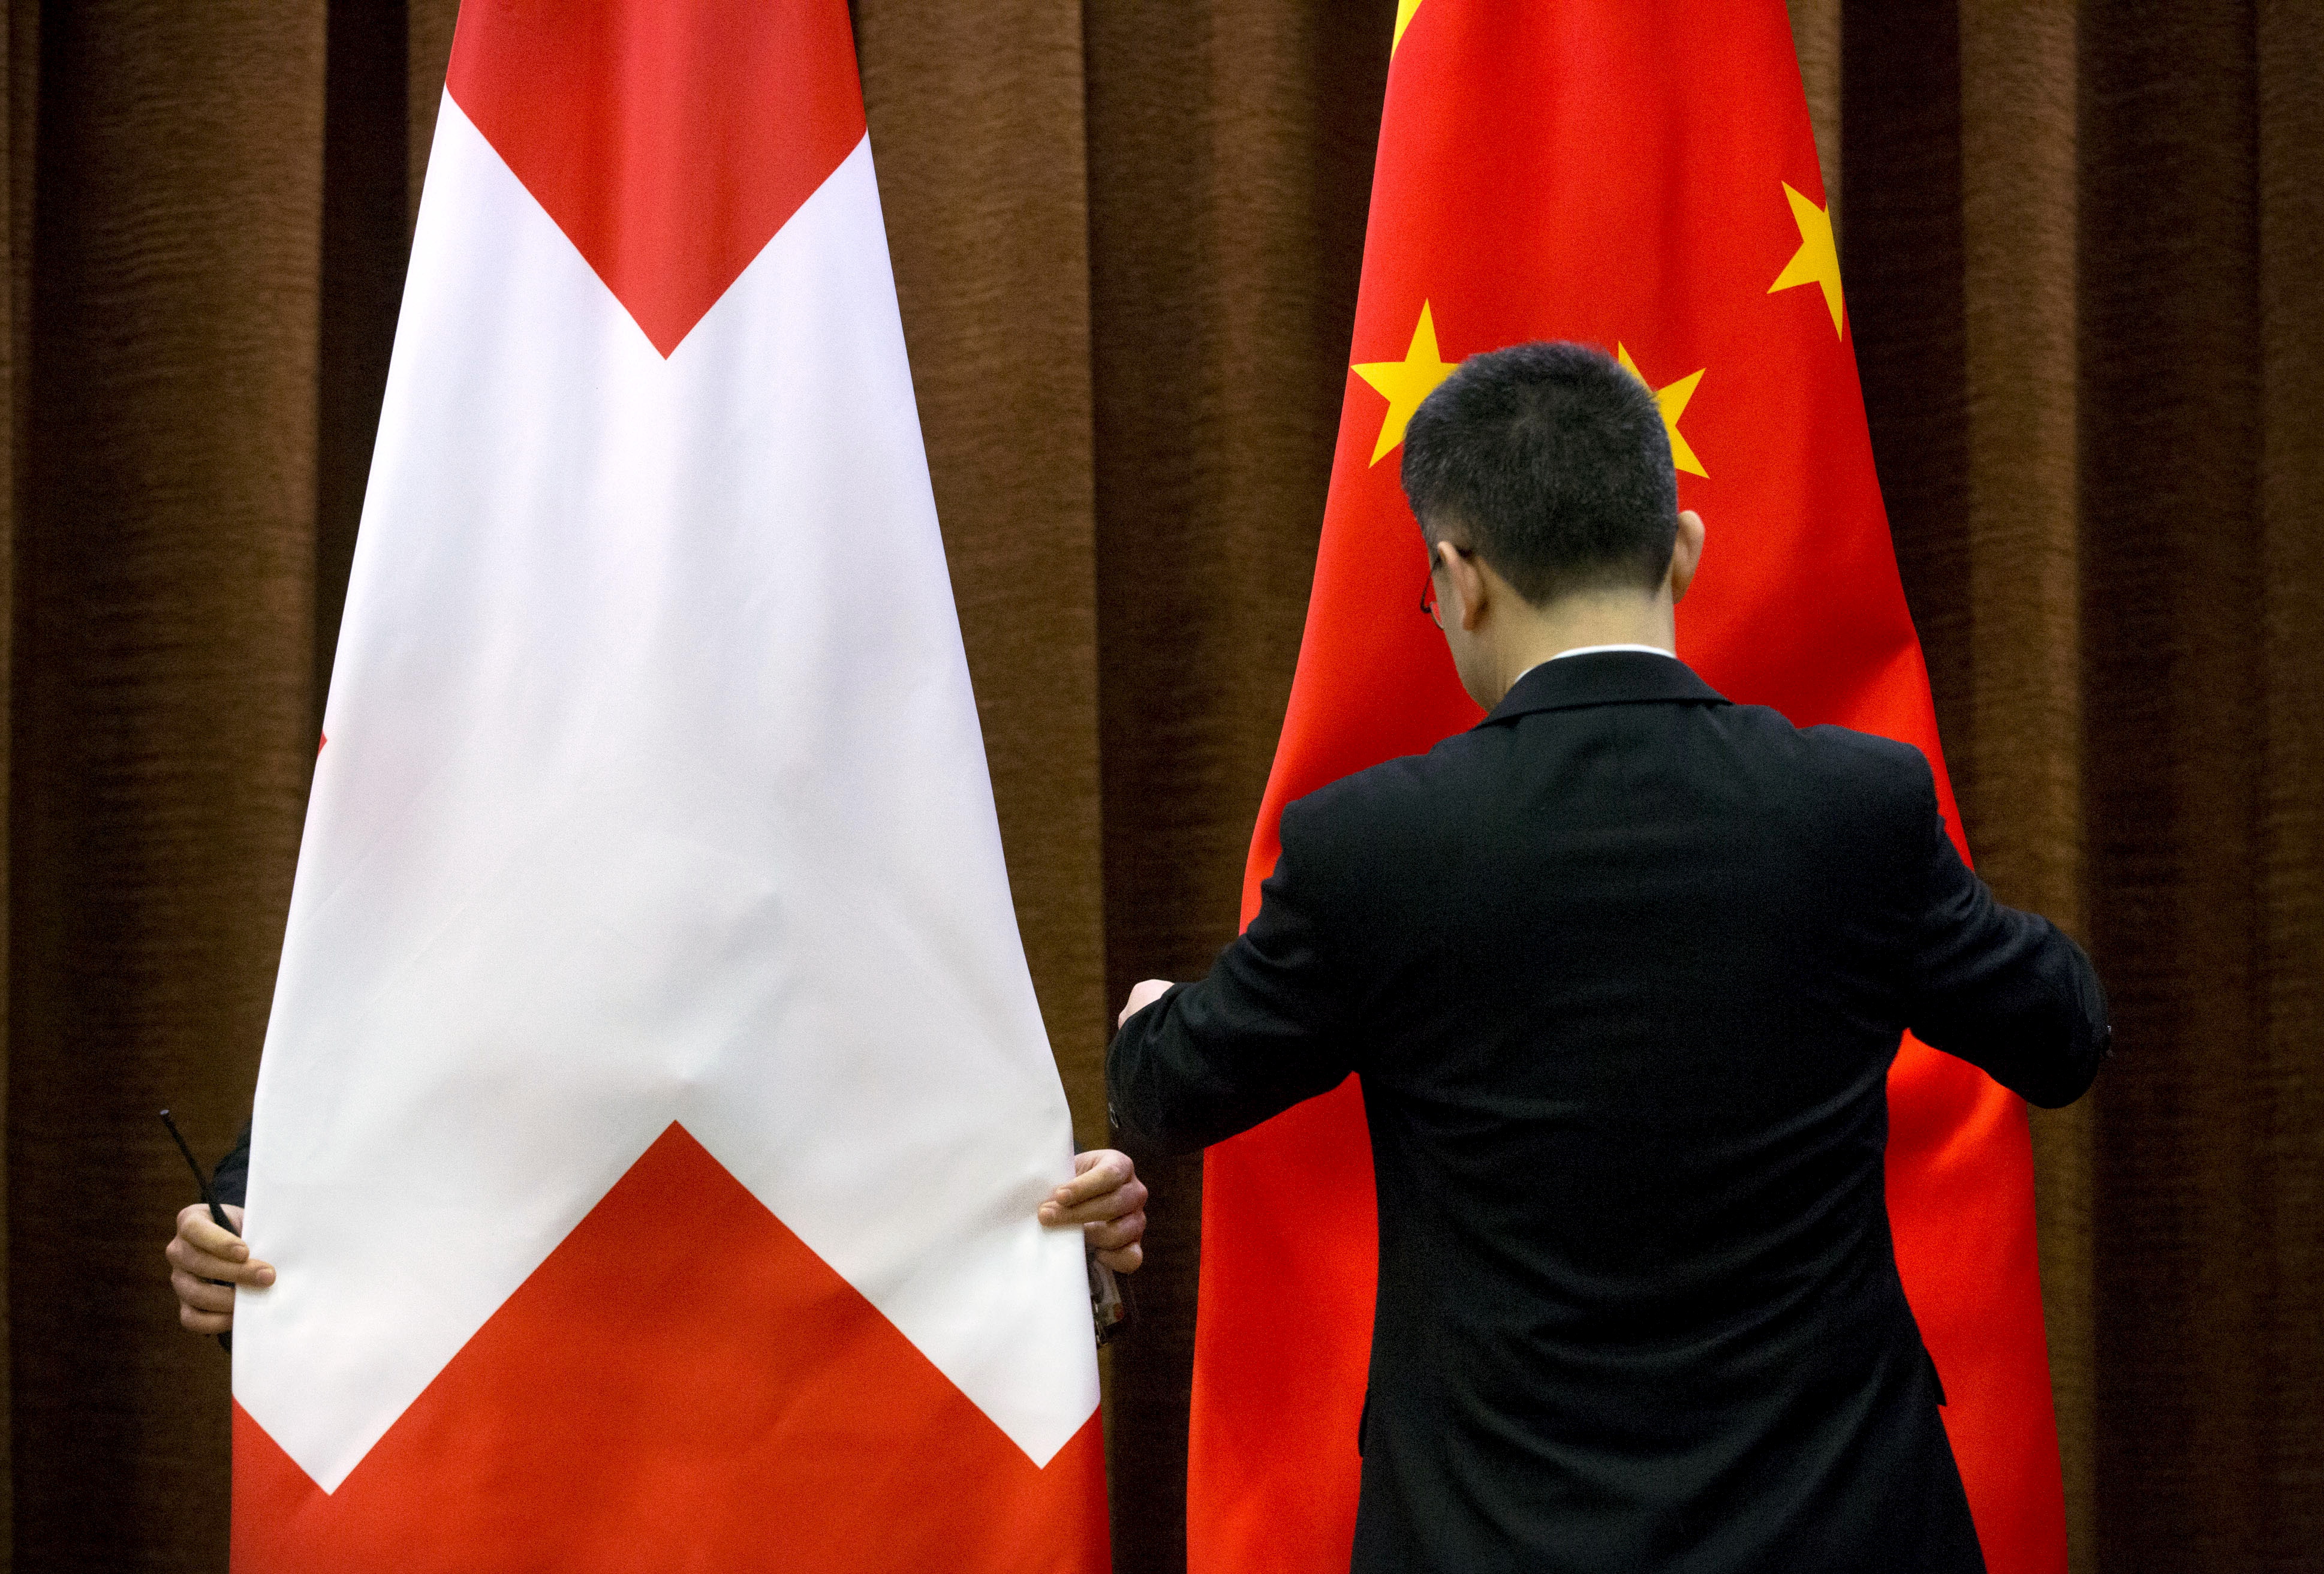 Workers adjust a Swiss and Chinese flag before a bilateral meeting between Chinese Foreign Minister Wang Yi and Swiss Foreign Minister Didier Burkhalter at the Ministry of Foreign Affairs in Beijing